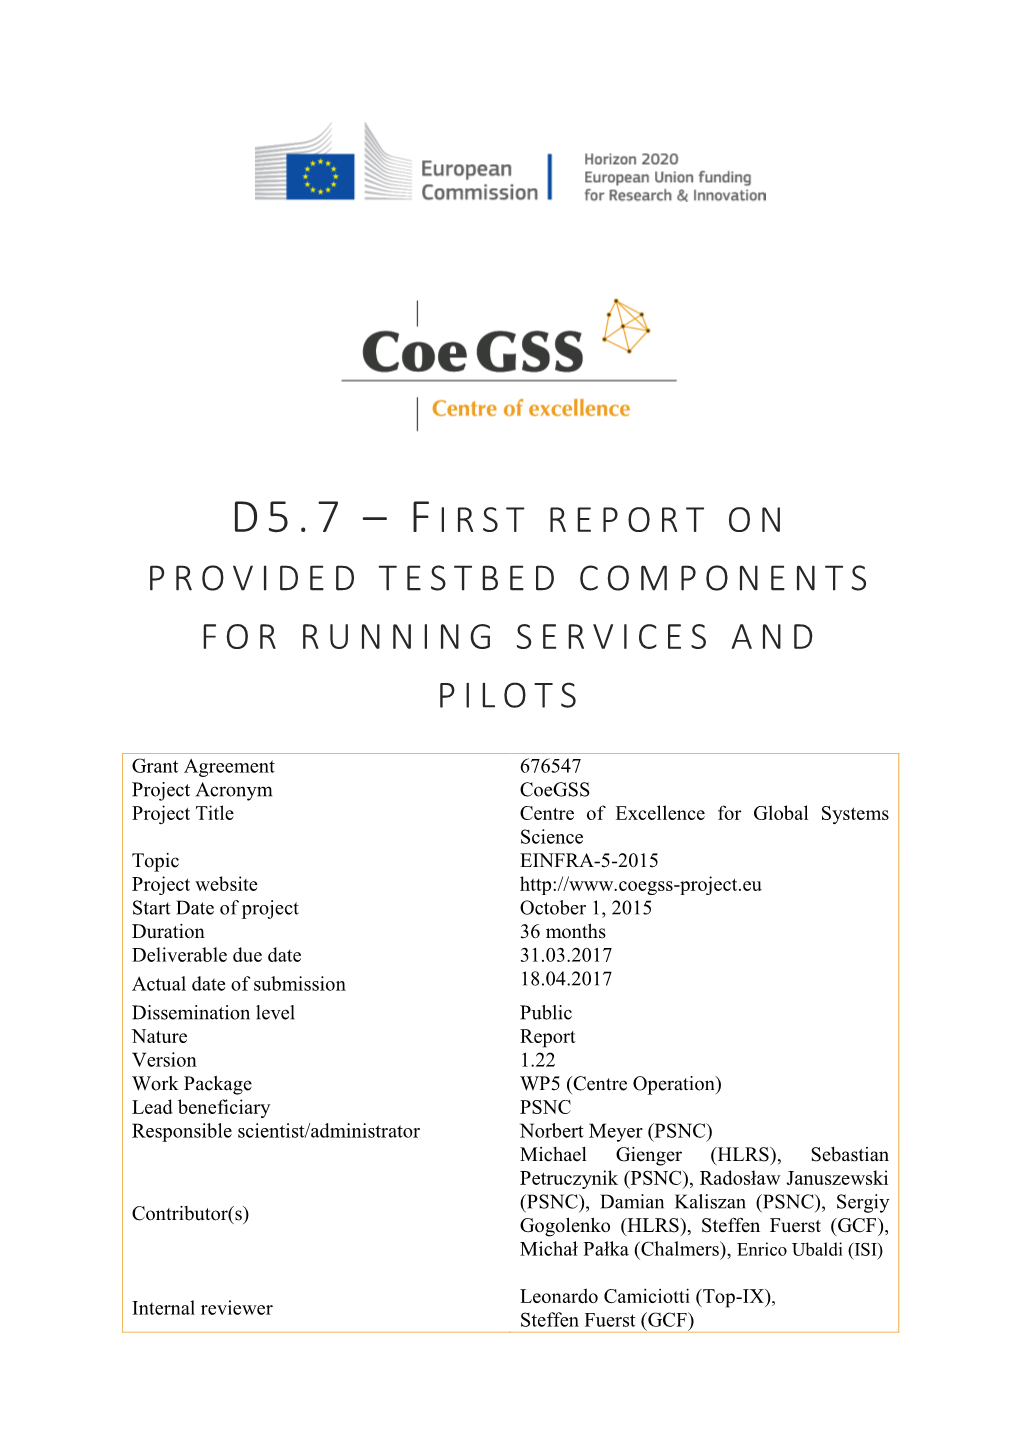 D5.7 – First Report on Provided Testbed Components for Running Services and Pilots